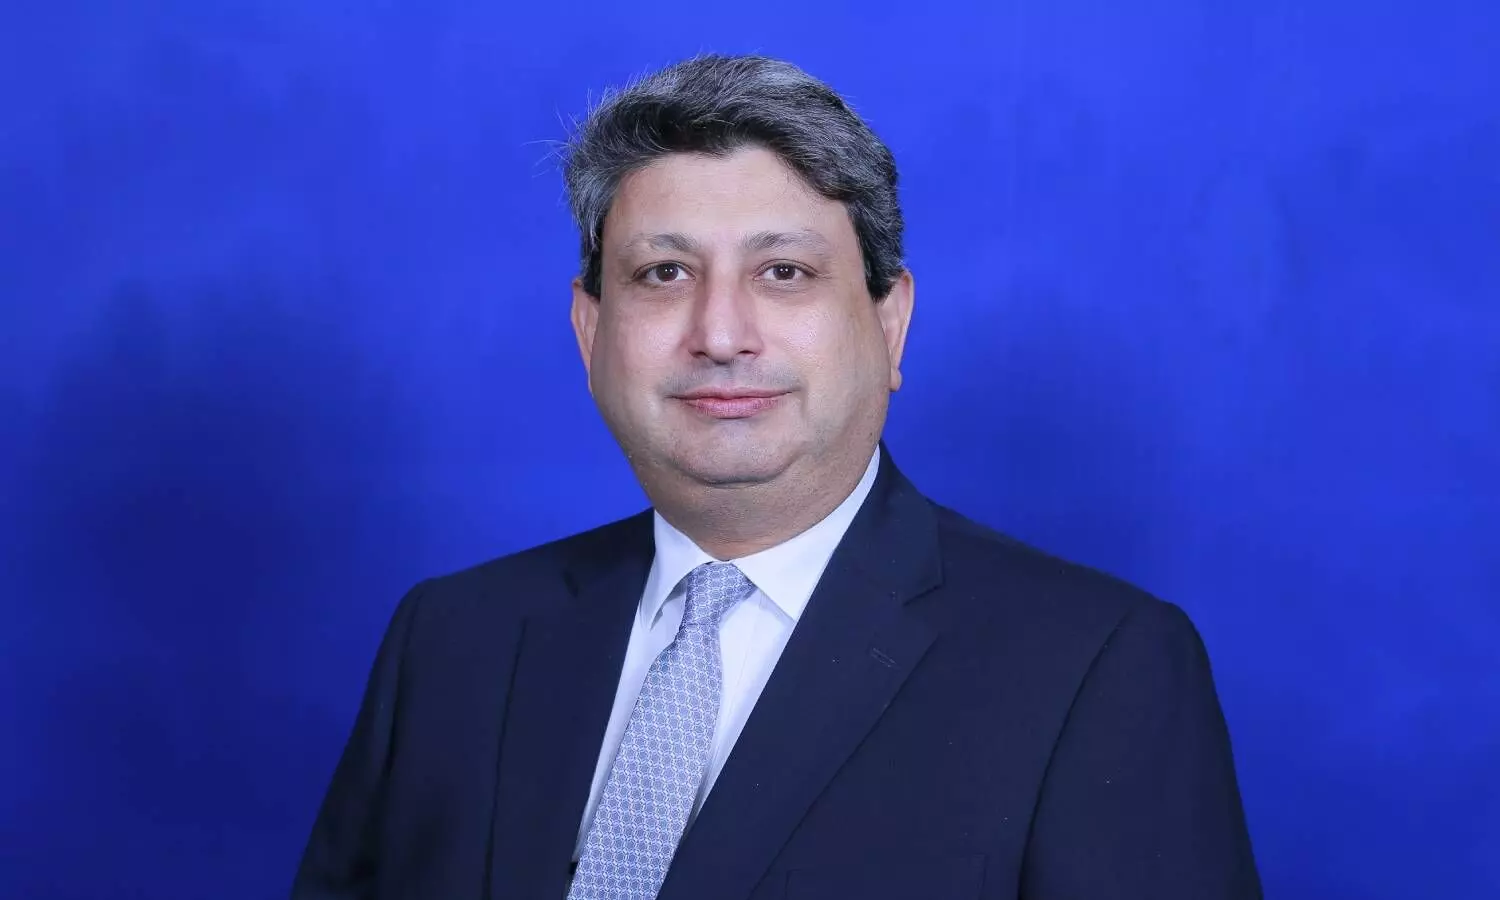 Nagporewalla is new CEO of KPMG in India, to assume office in Feb